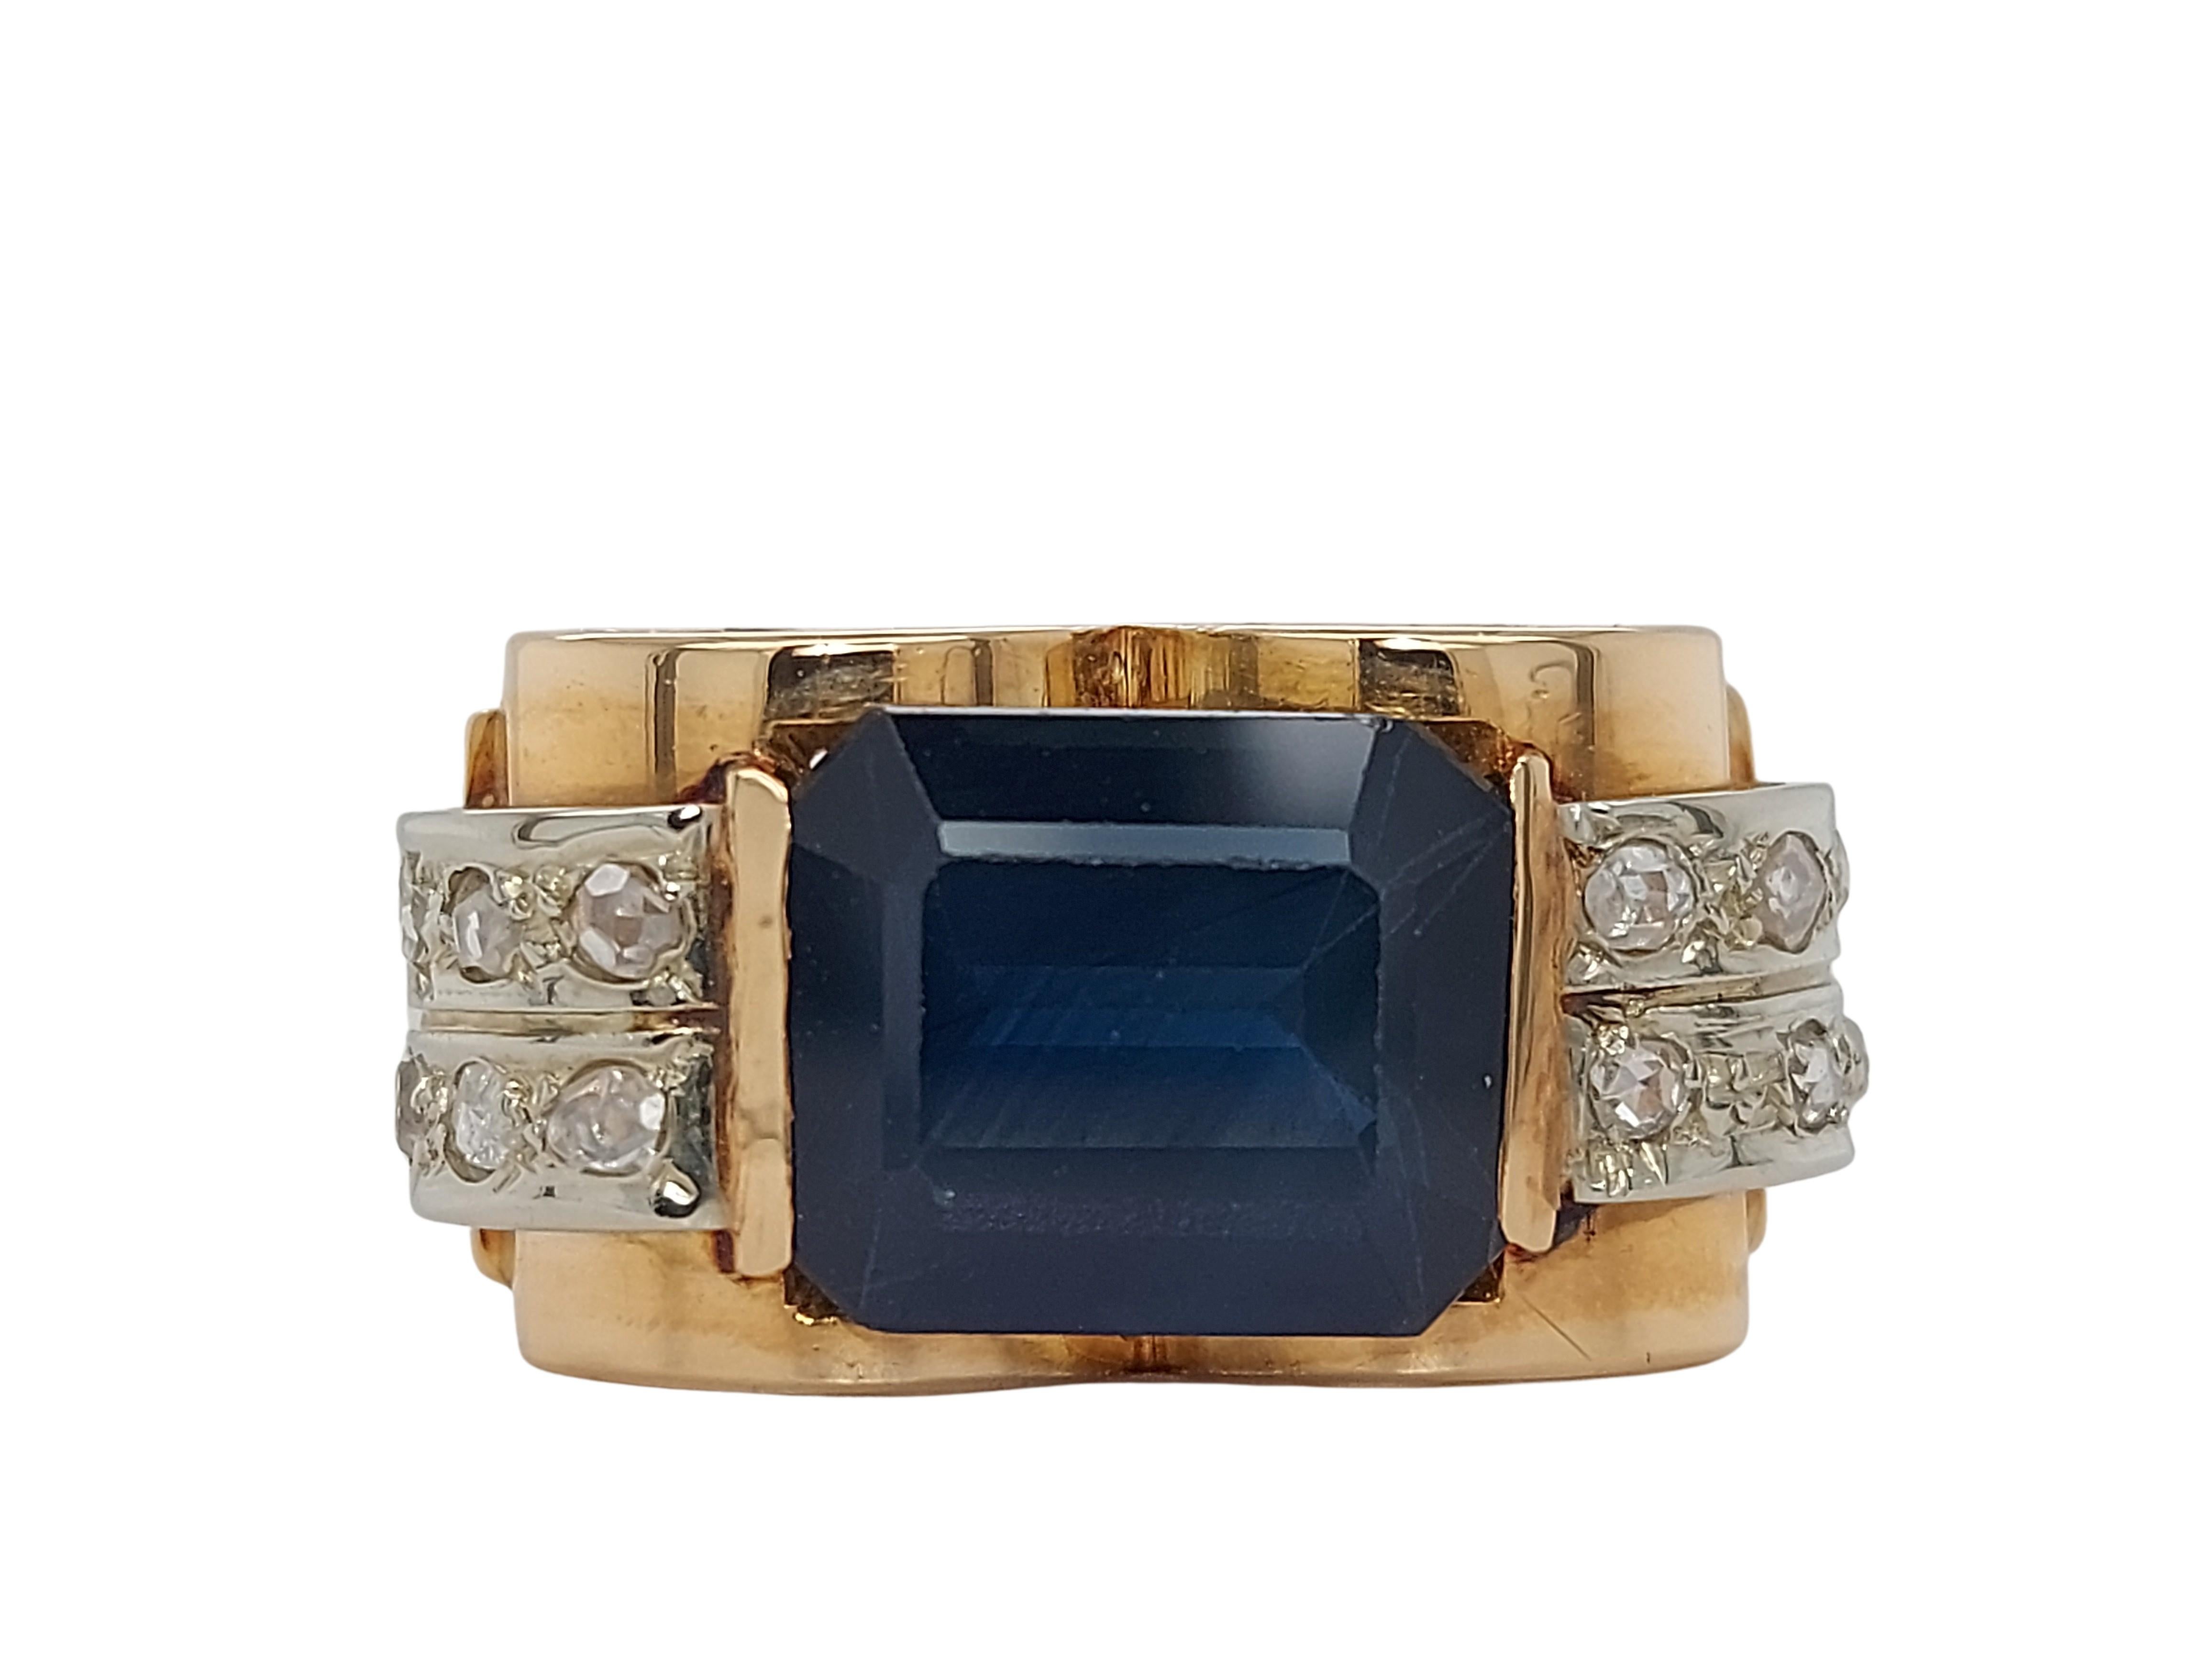 1940' s 18kt Yellow Gold & Platinum Ring With Ca. 3.50 ct Sapphire & Diamonds 

Sapphire: Emerald cut sapphire approx. 3.50ct

Diamonds: 12 rose cut diamonds

Material: 18kt yellow and platinum

Total weight: 9.0 grams / 0.315 oz / 5.80 dwt

Ring